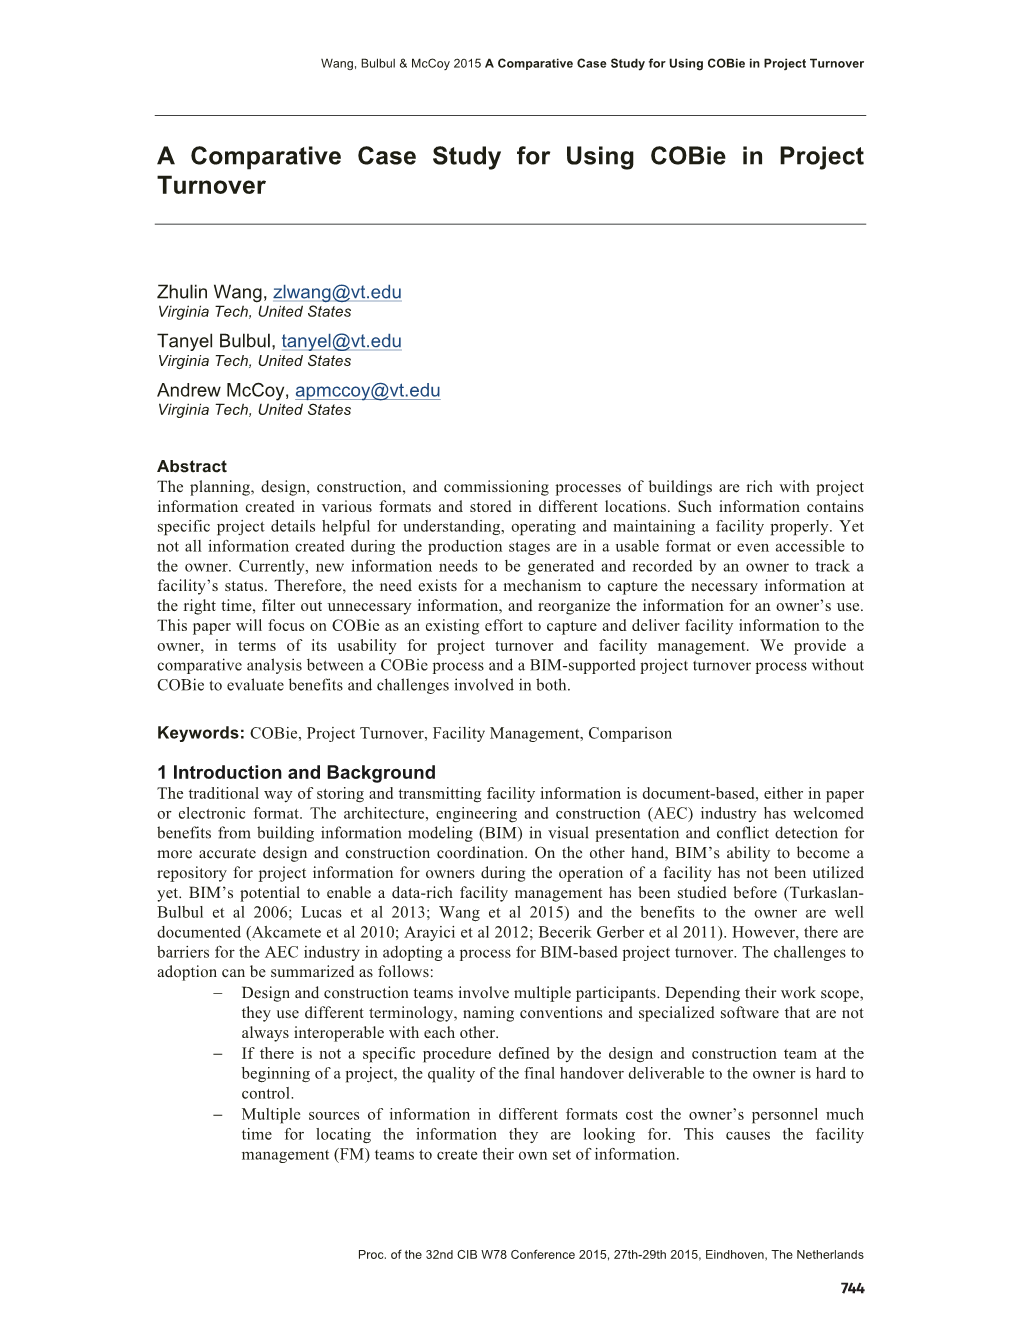 A Comparative Case Study for Using Cobie in Project Turnover